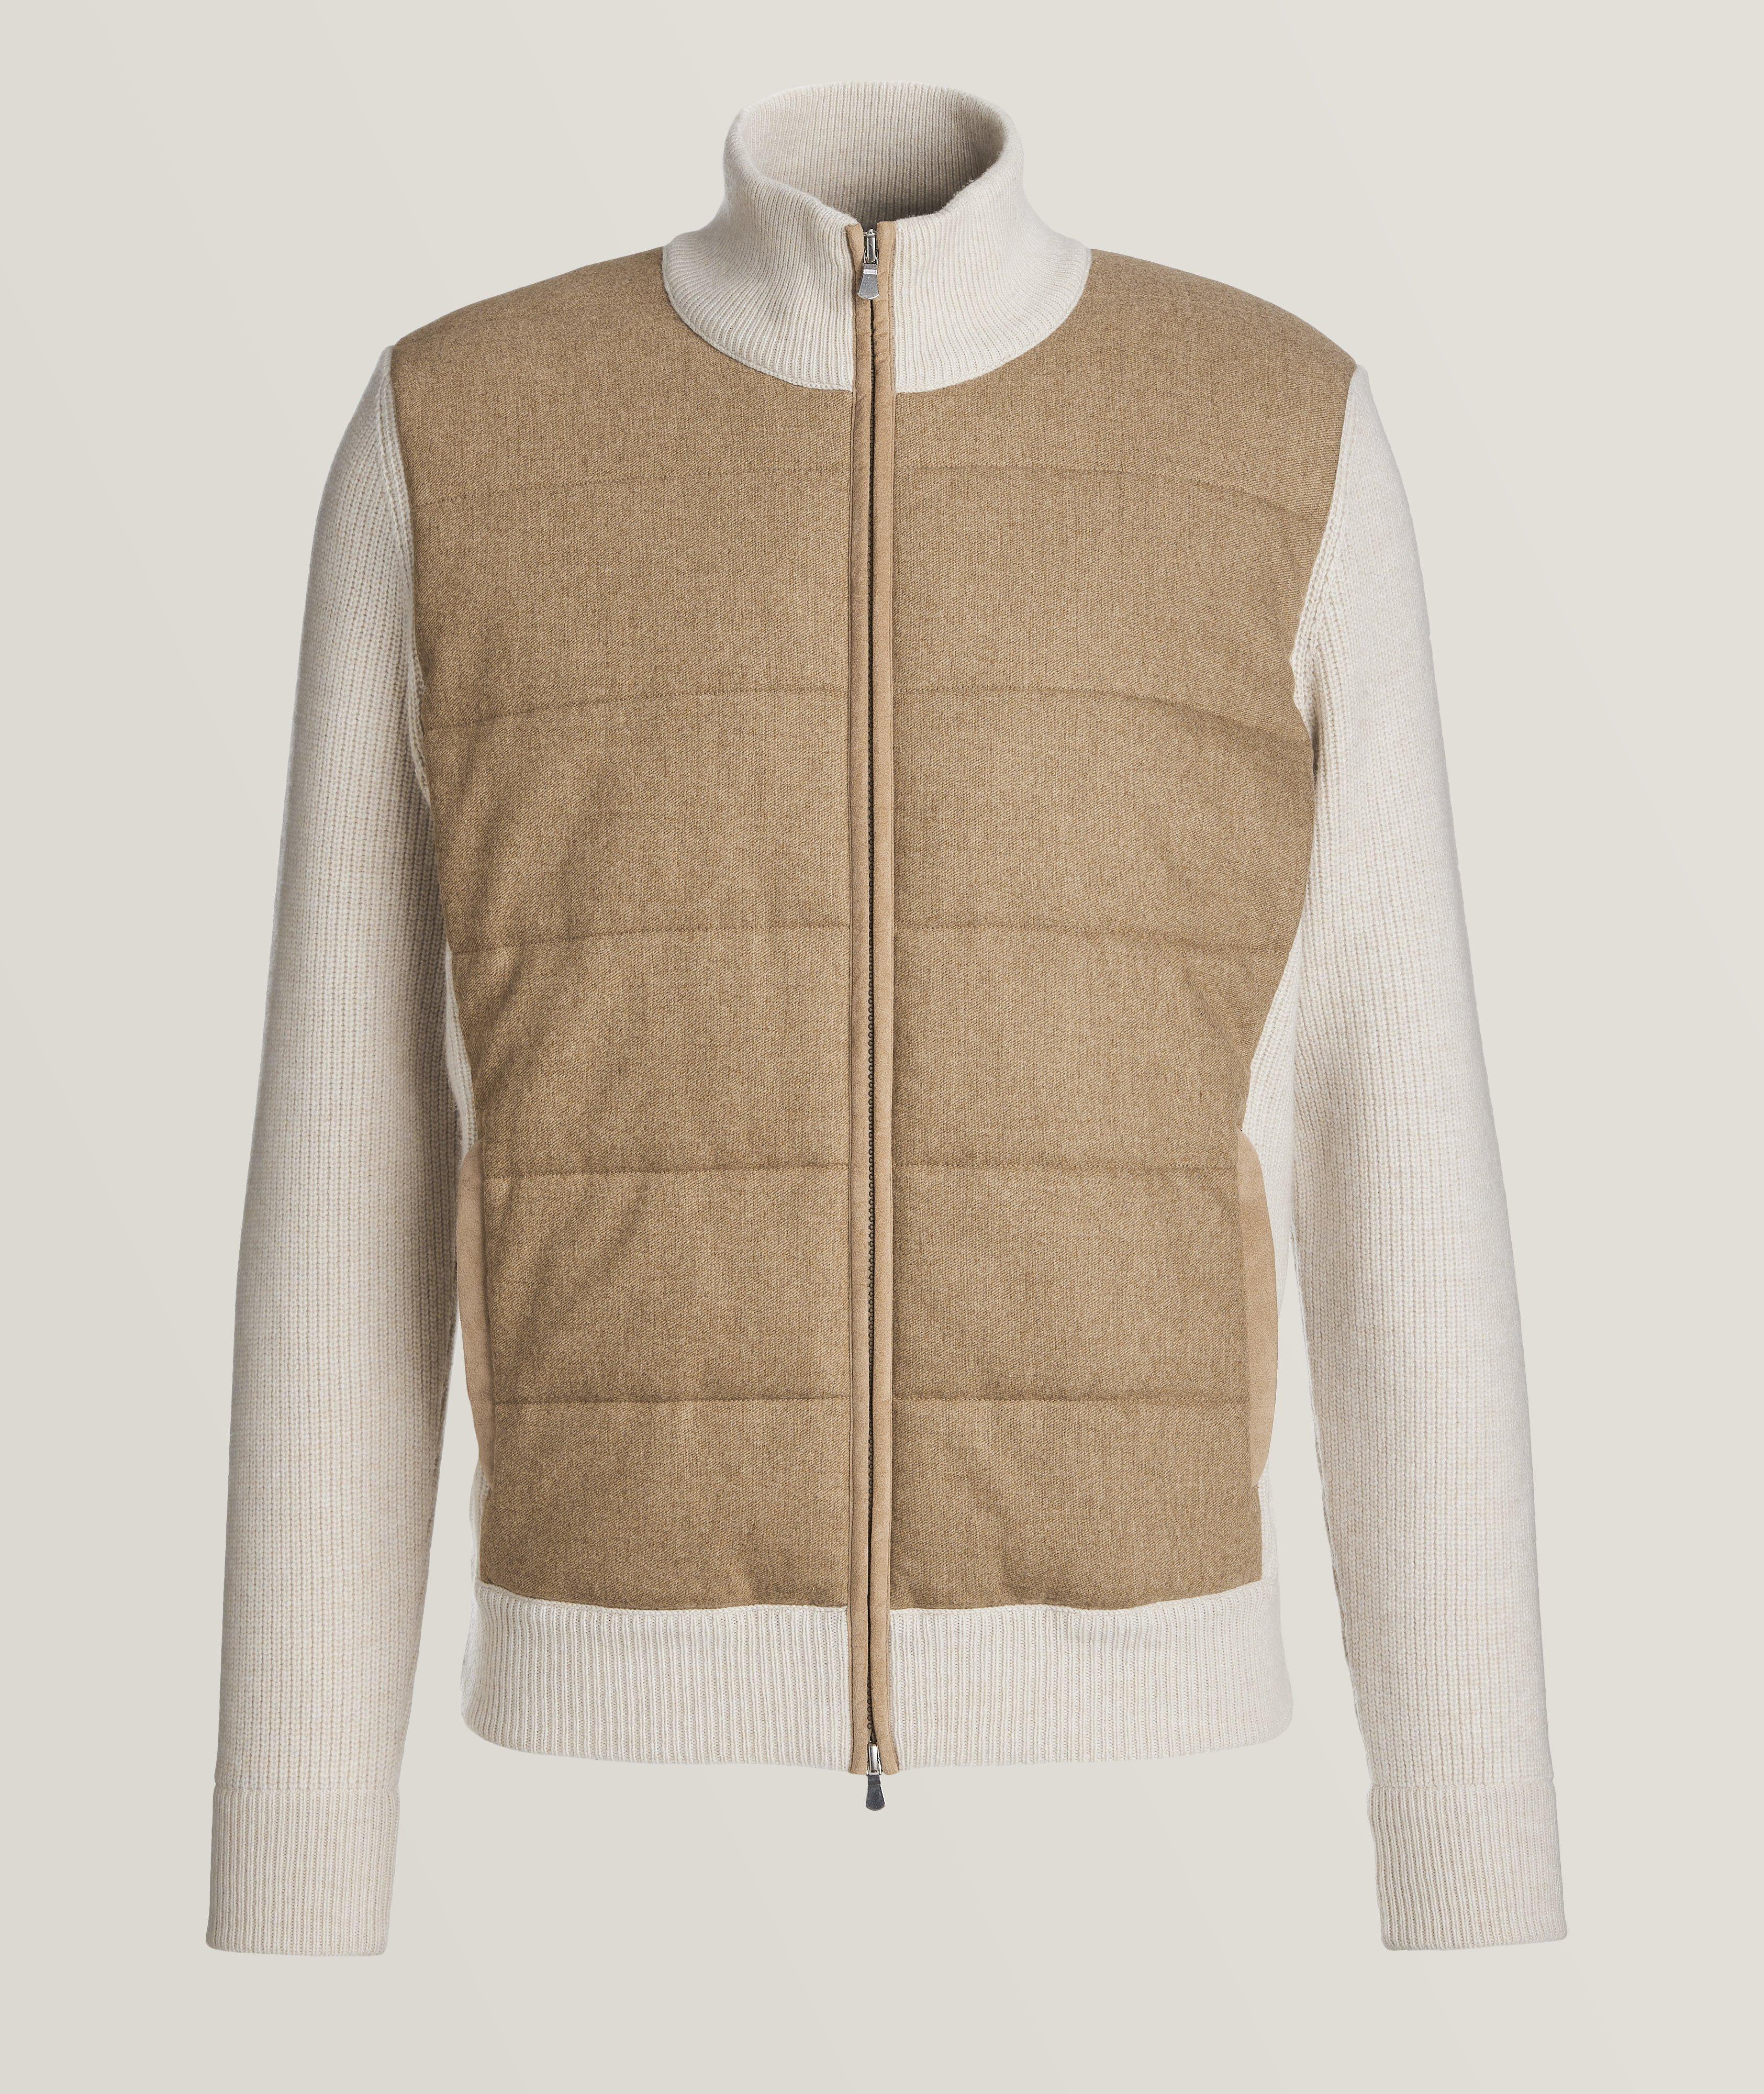 Padded Front Wool Zip-Up Sweater image 0